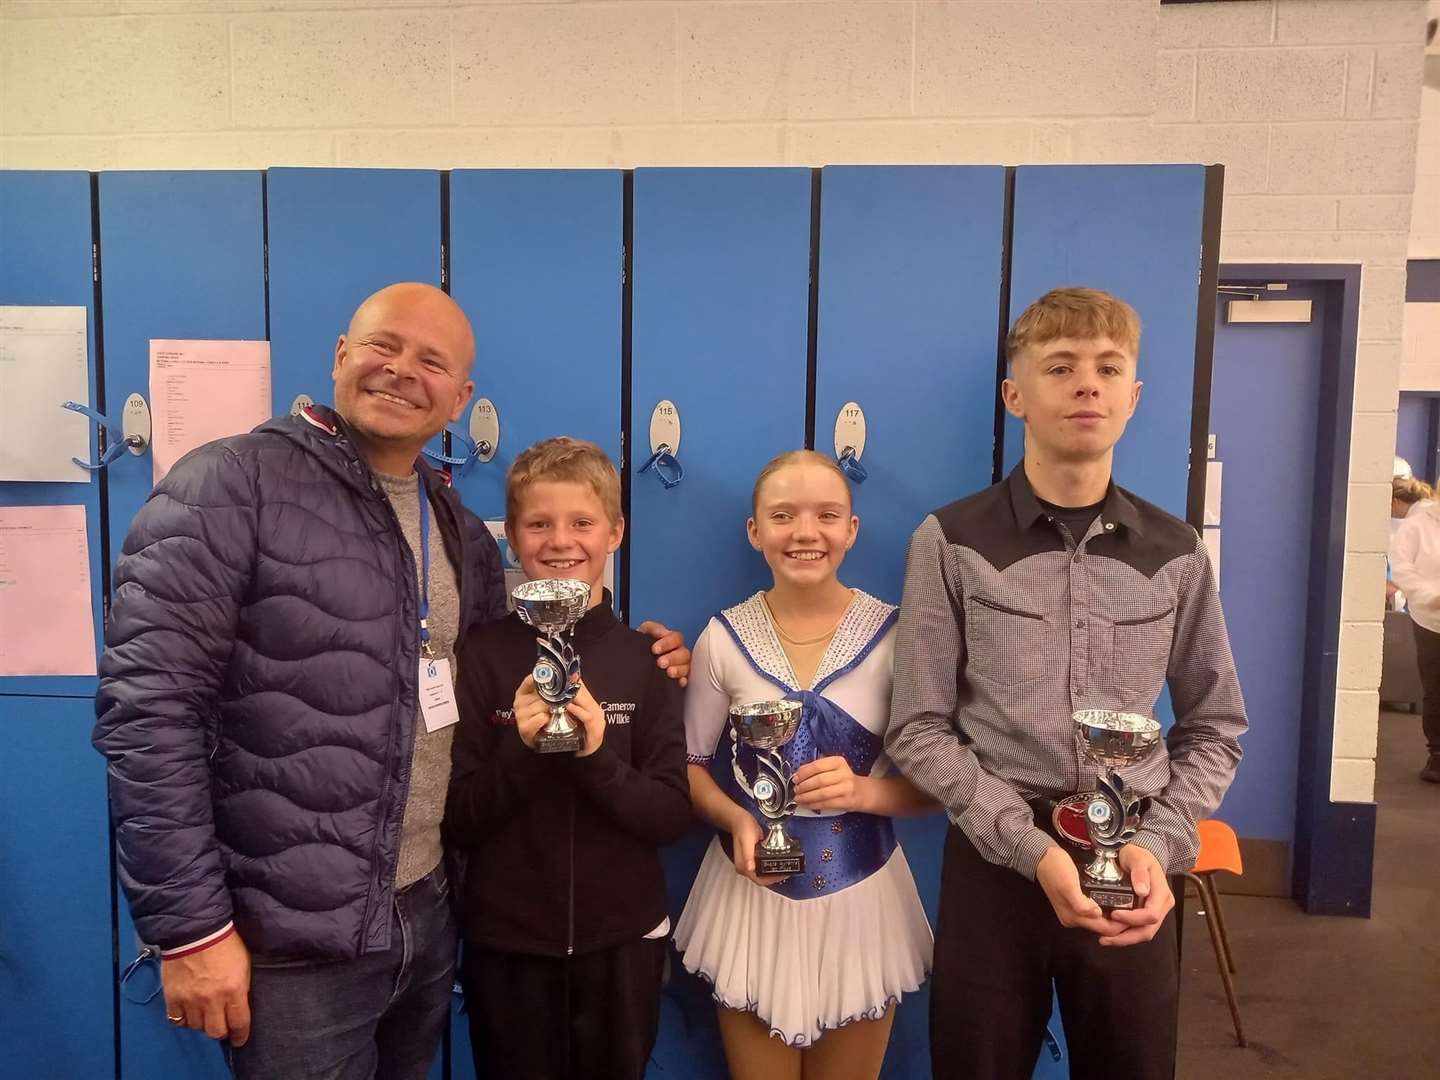 Moray Figure Skating Club coach Graeme Summers with medal winners Cameron Wilkie, Chloe Sutherland and Daniel Clapperton.